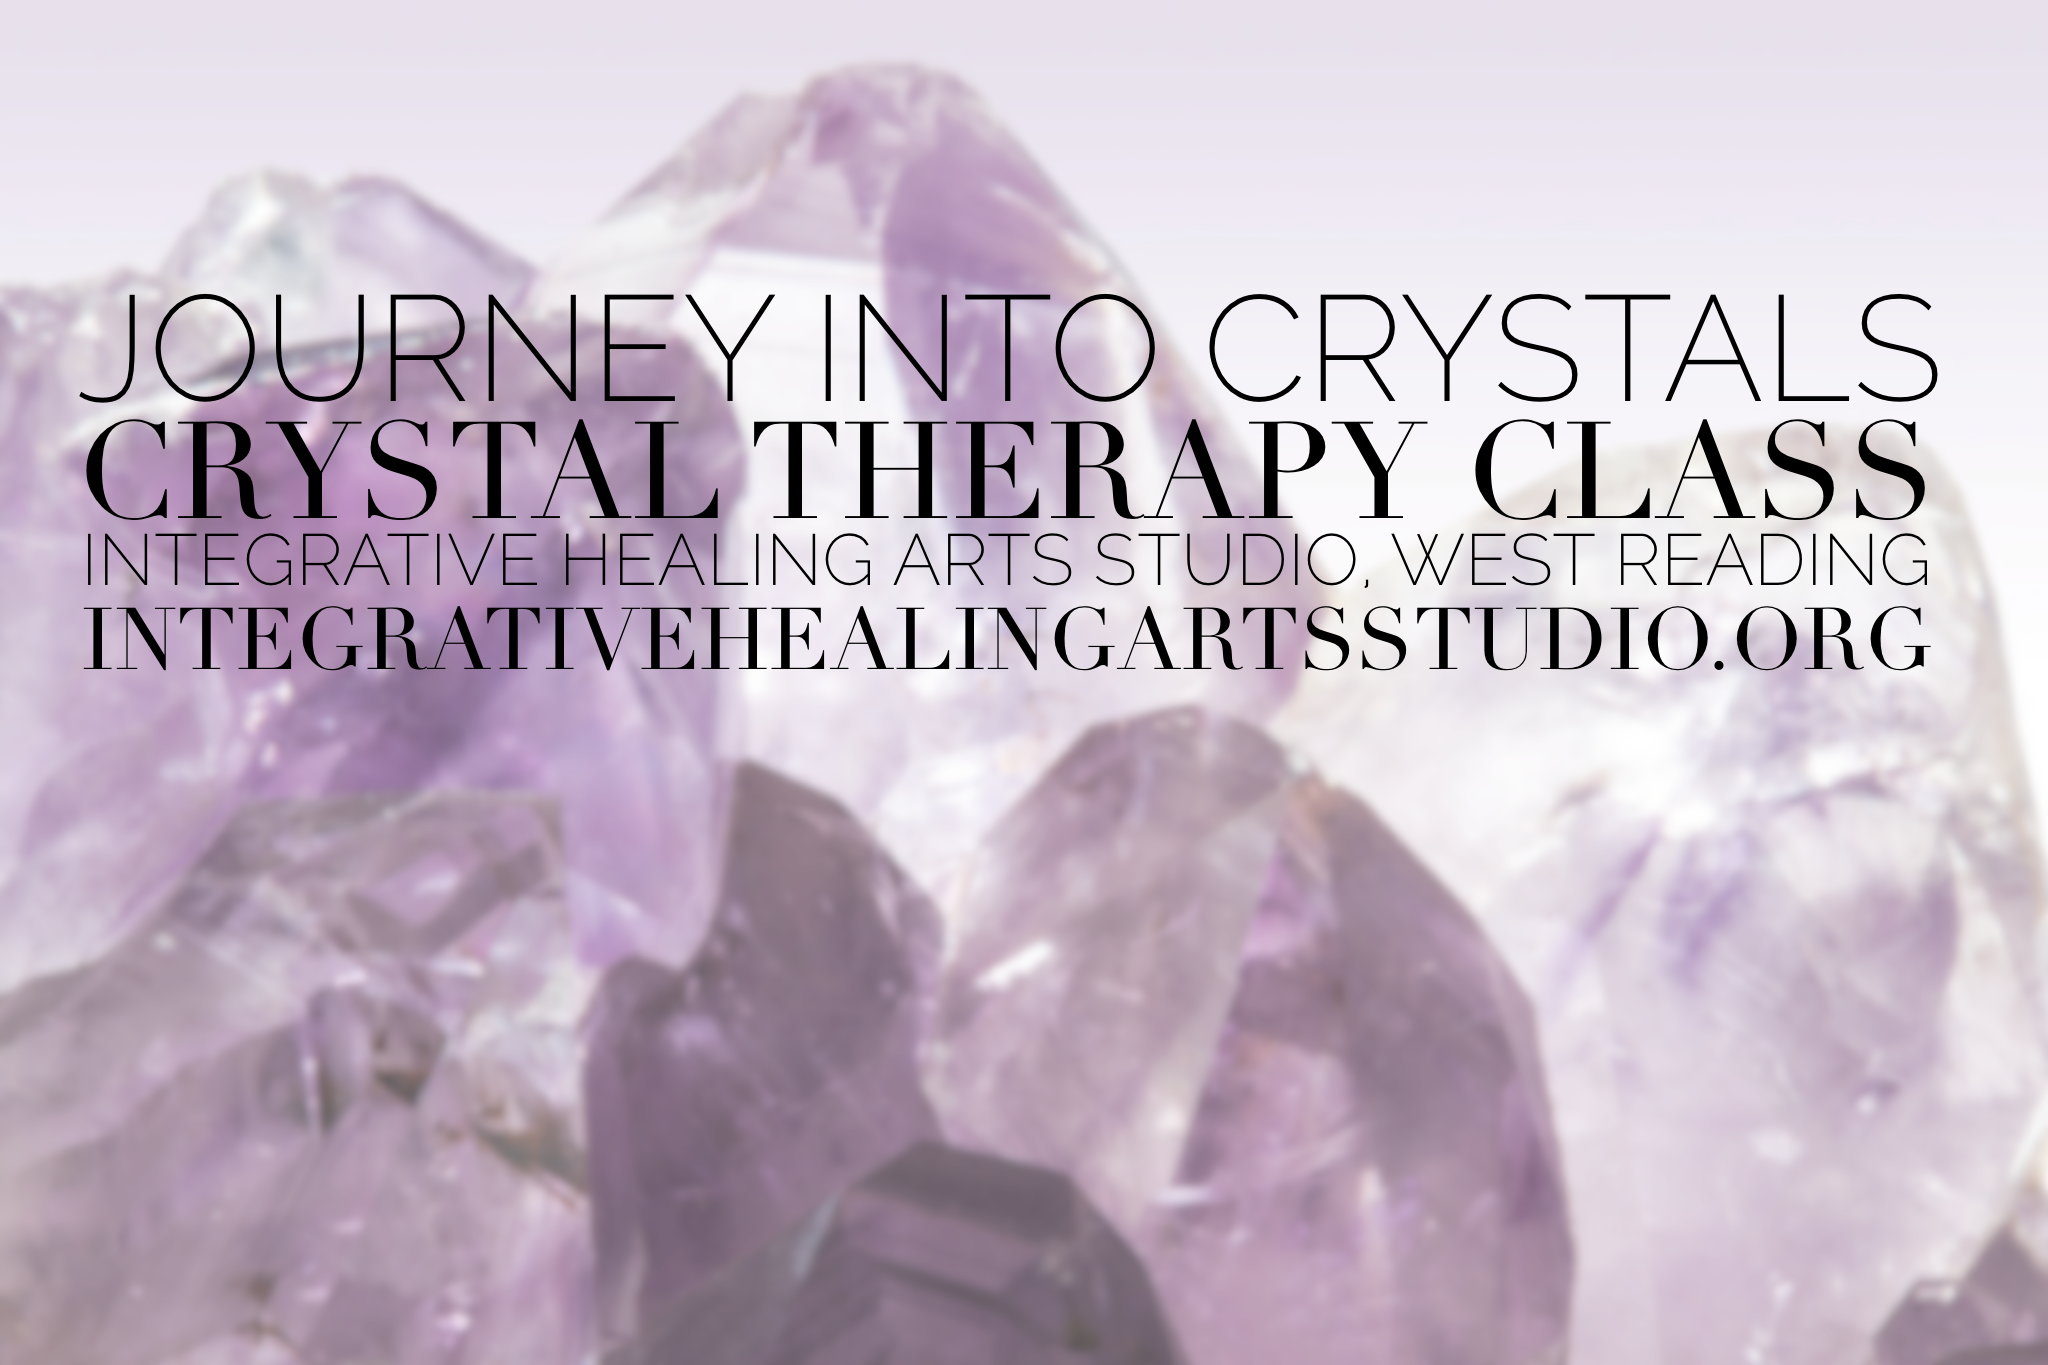 Crystal Therapy, Crystal Class, Journey into Crystals at Integrative Healing Arts Studio West Reading